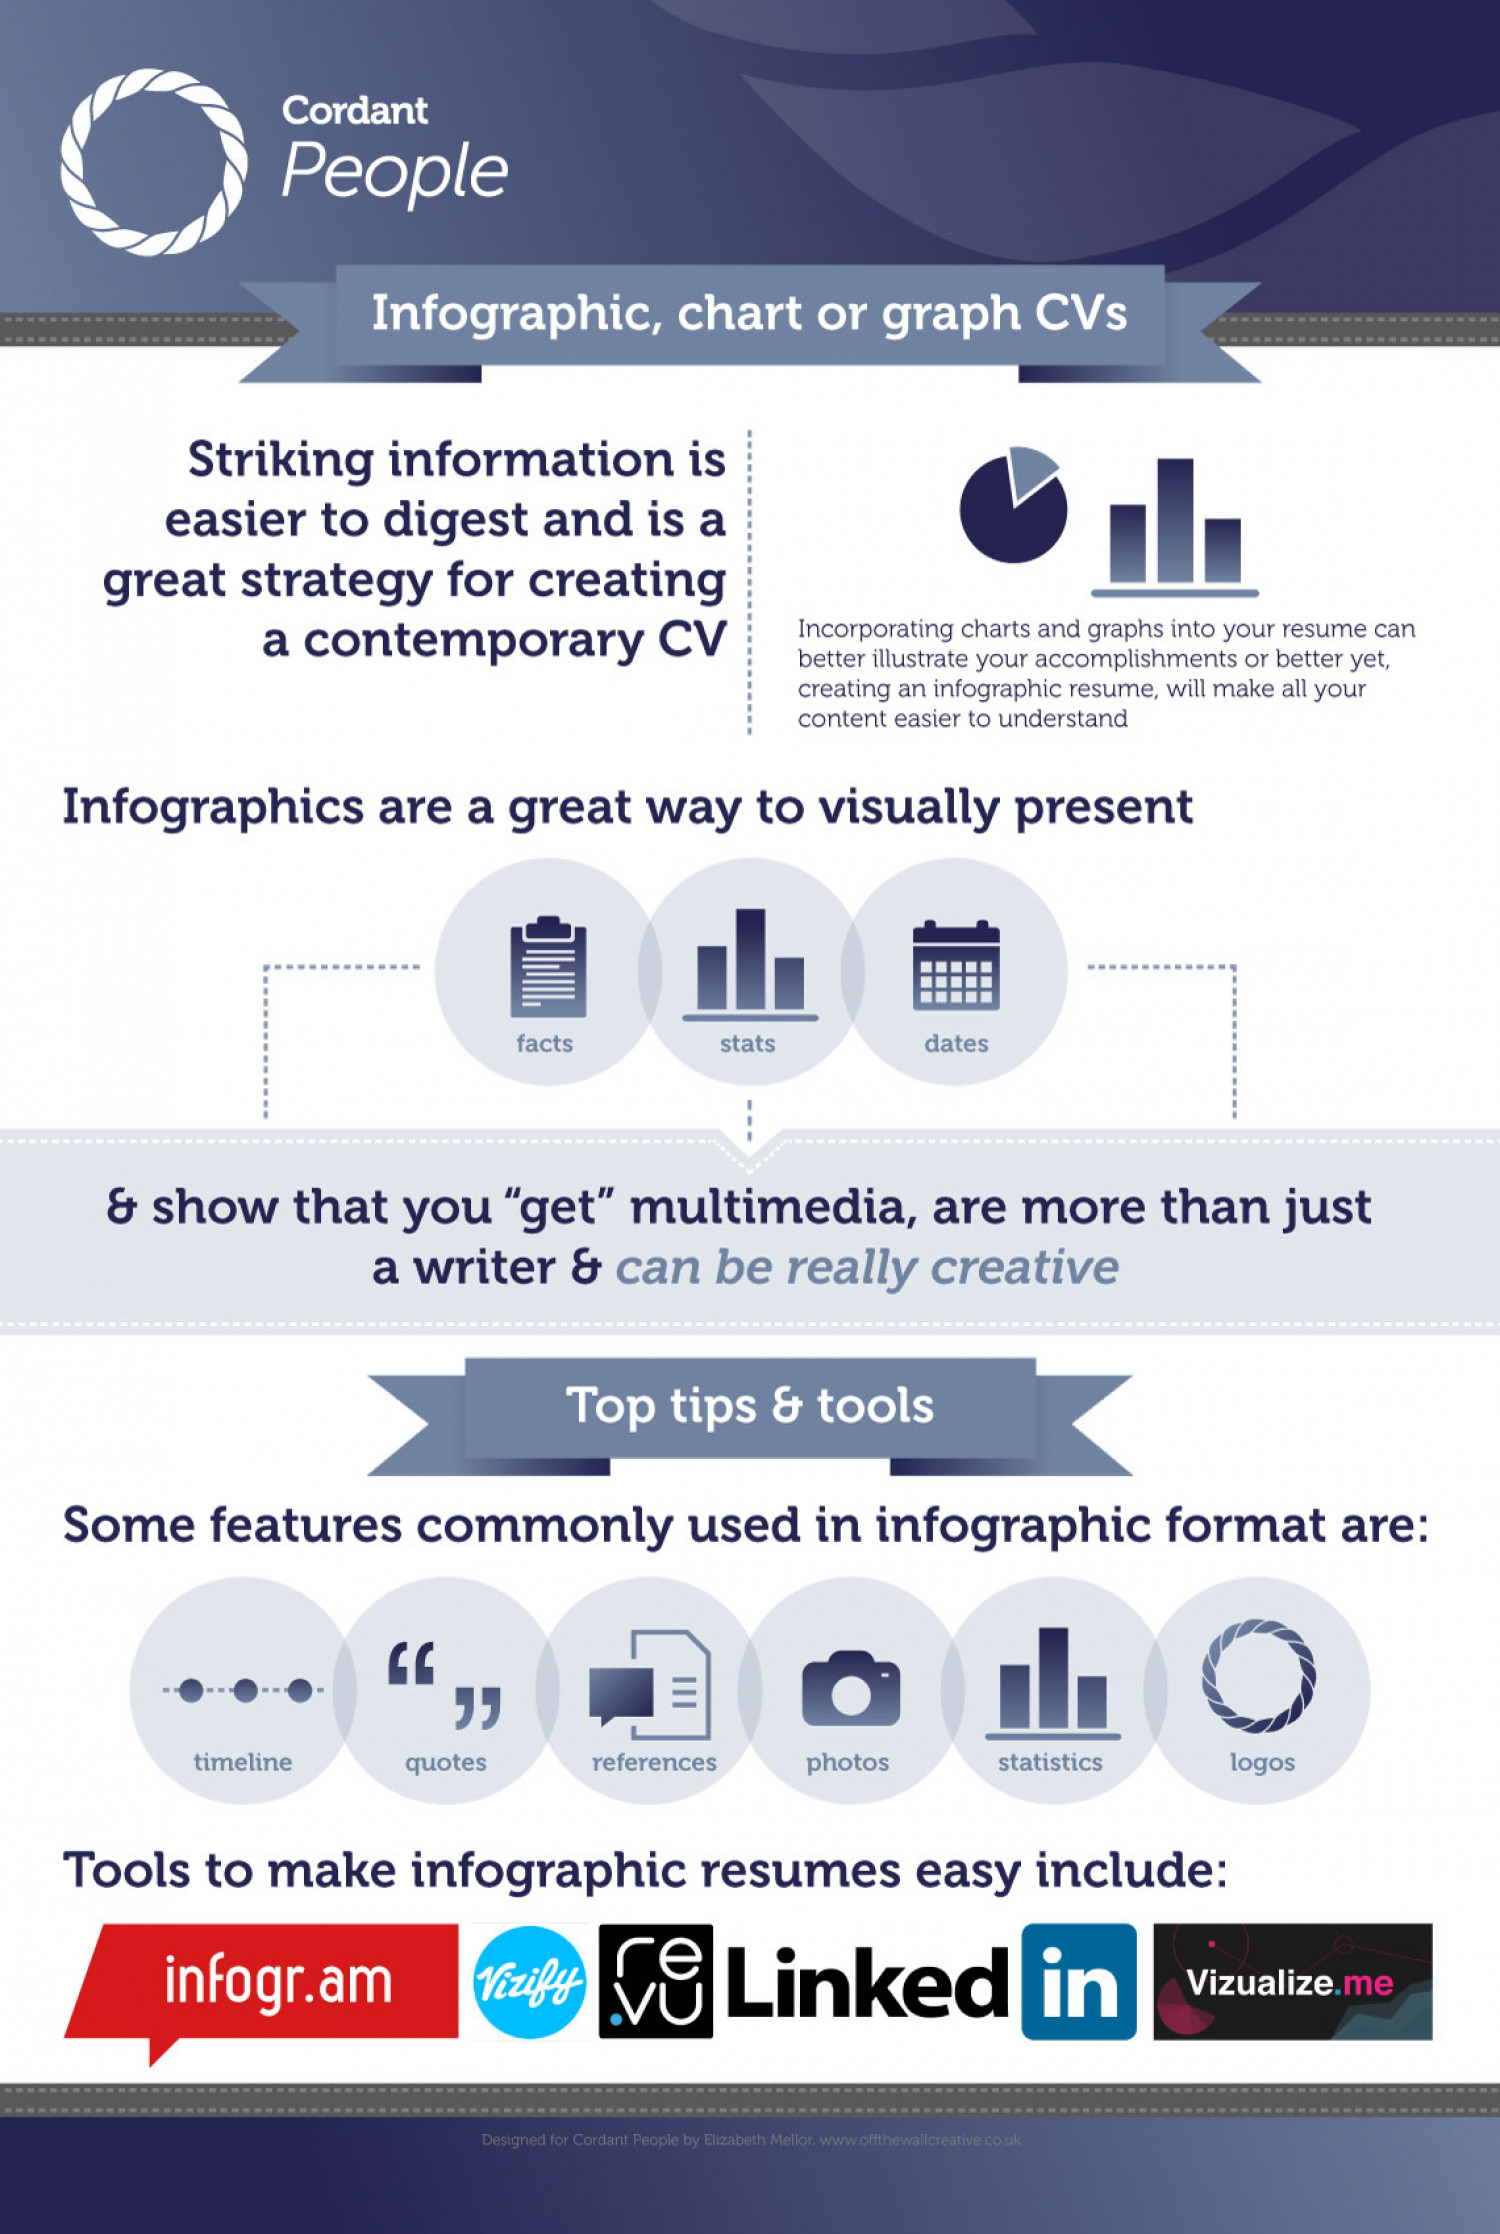 Using infographics, chart or graph CVs Infographic